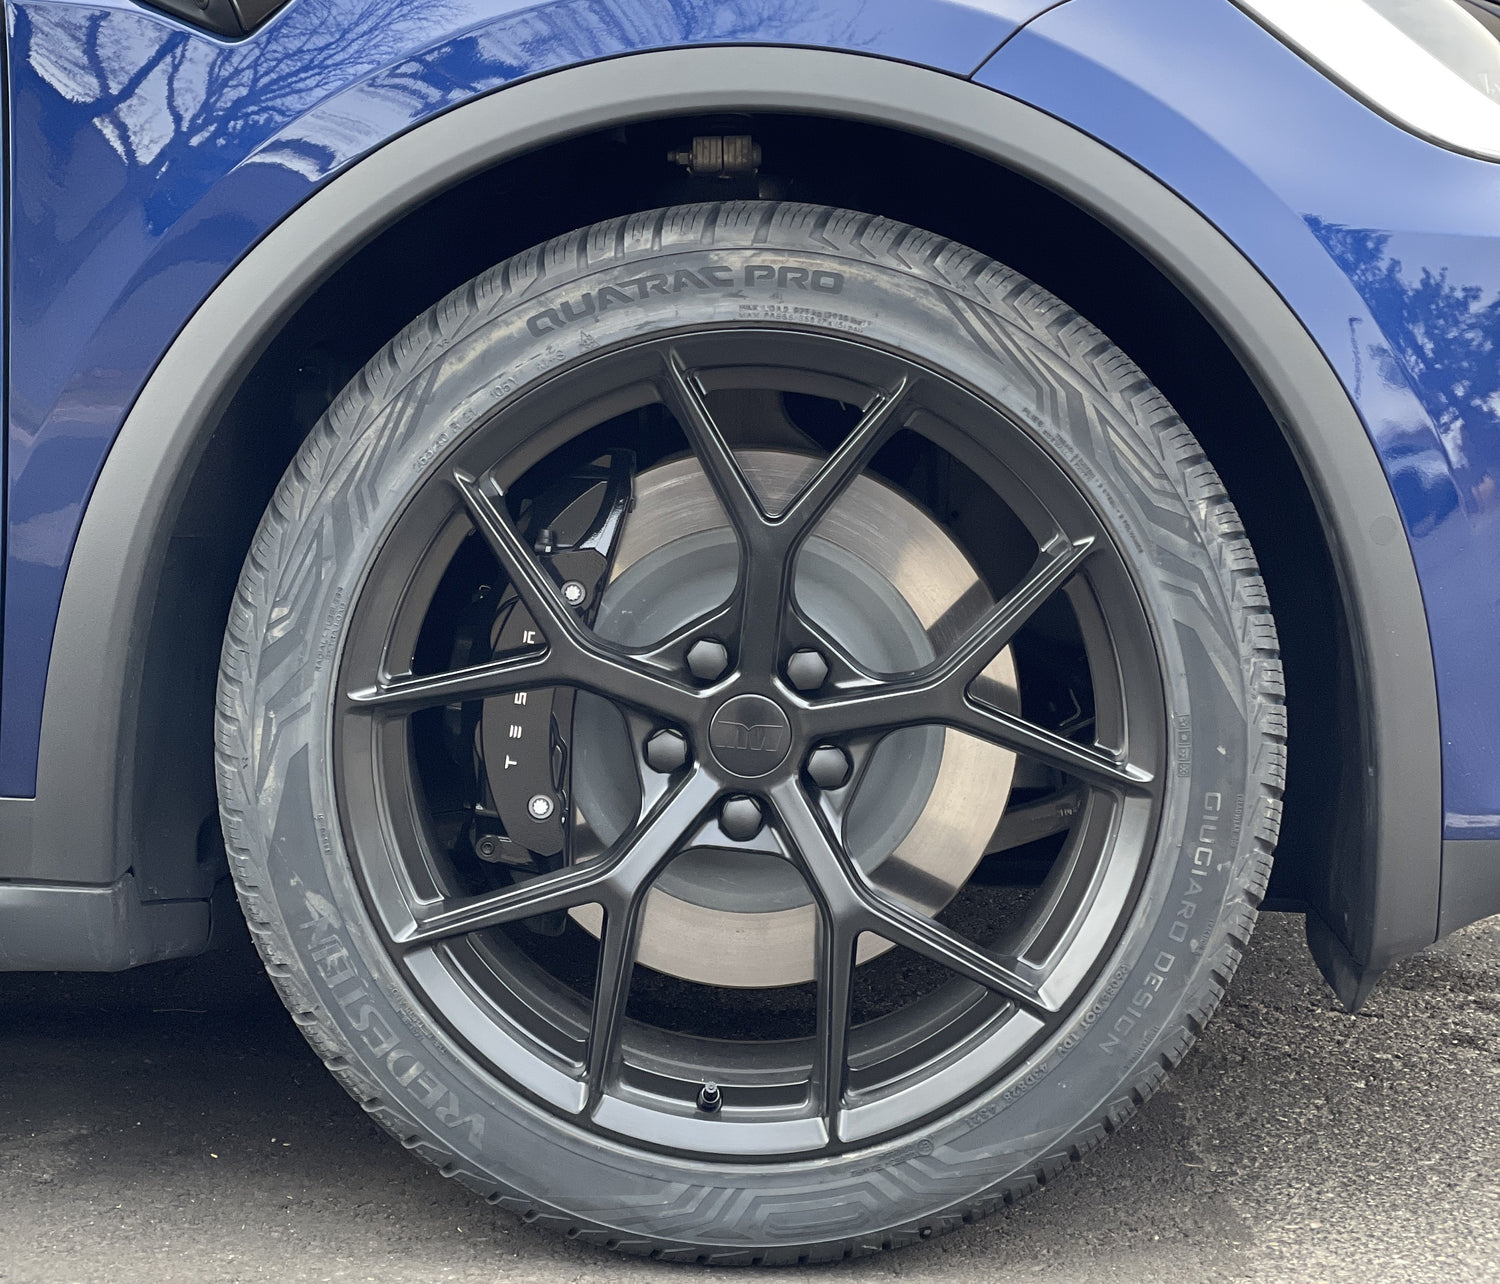 Premium parts and accessories for Tesla vehicles – Martian Wheels